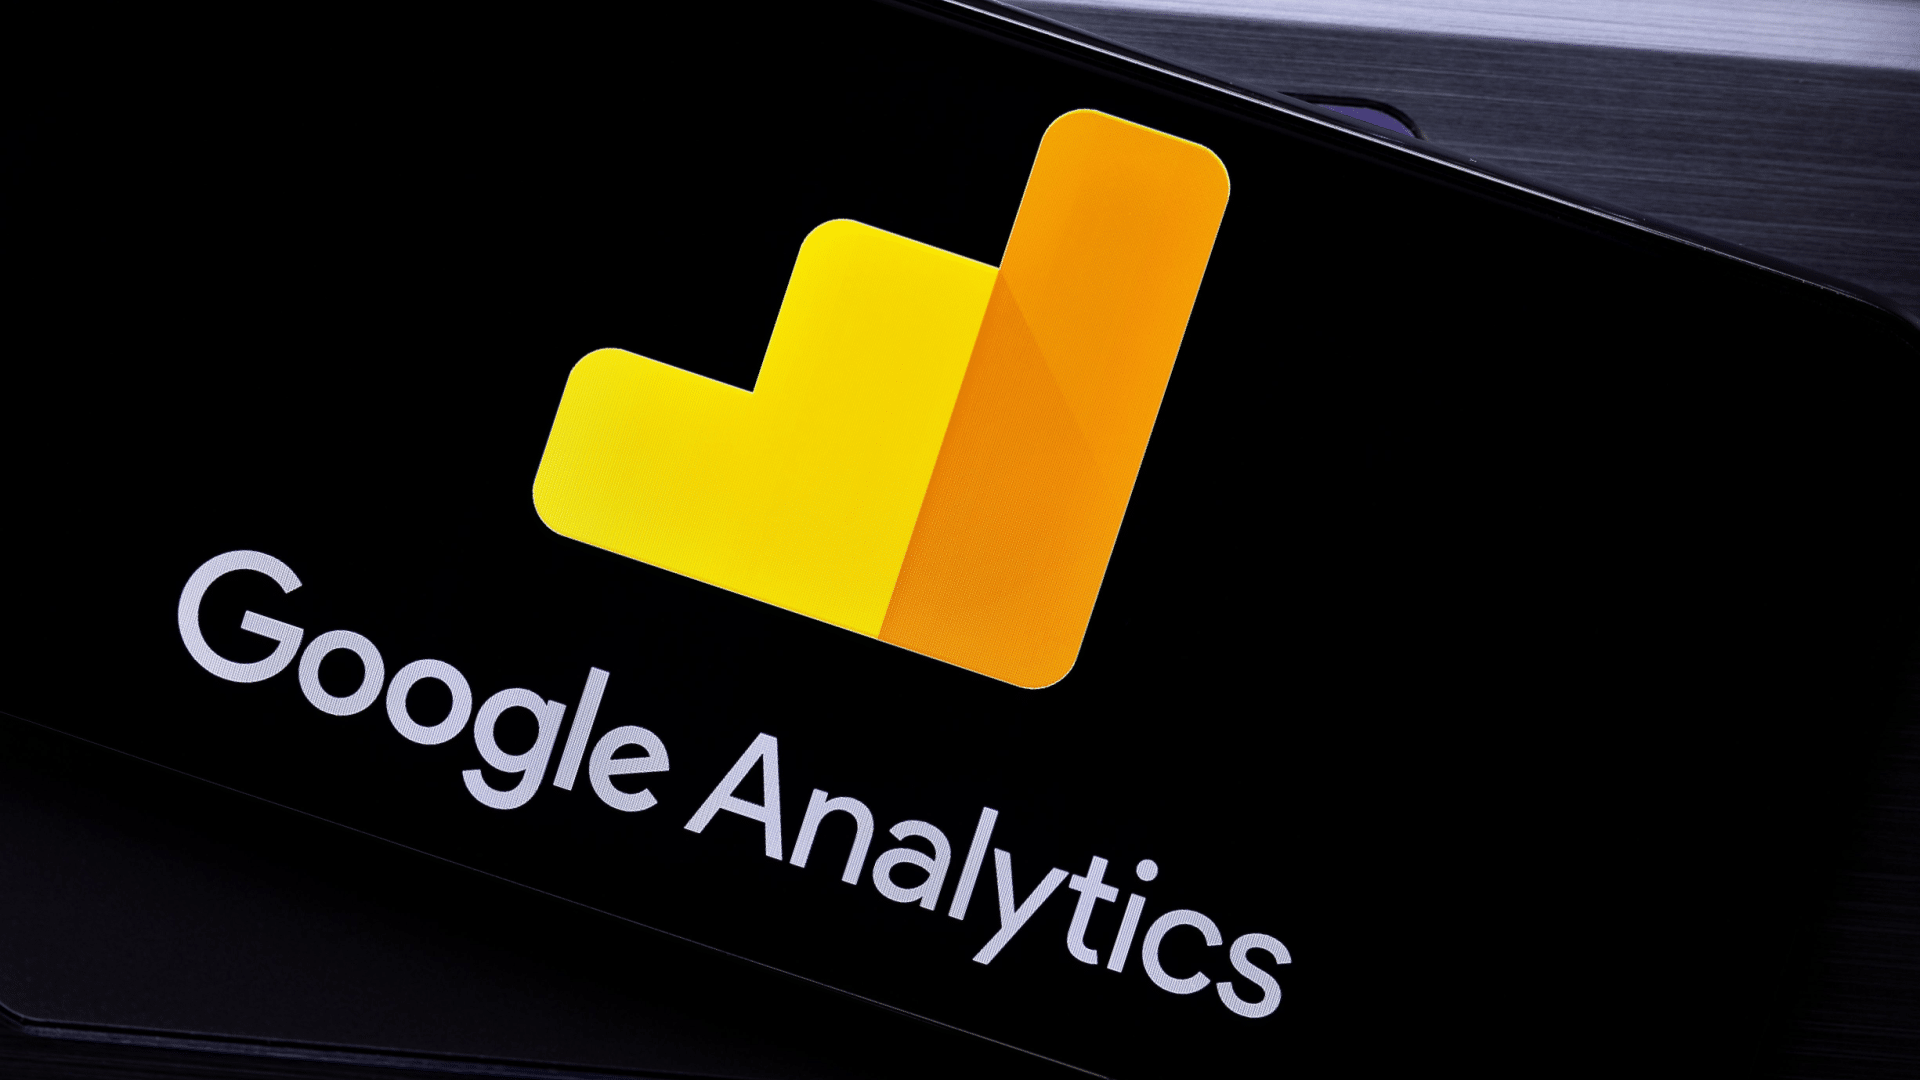 #Google Analytics 4 adds new consent mode setting section